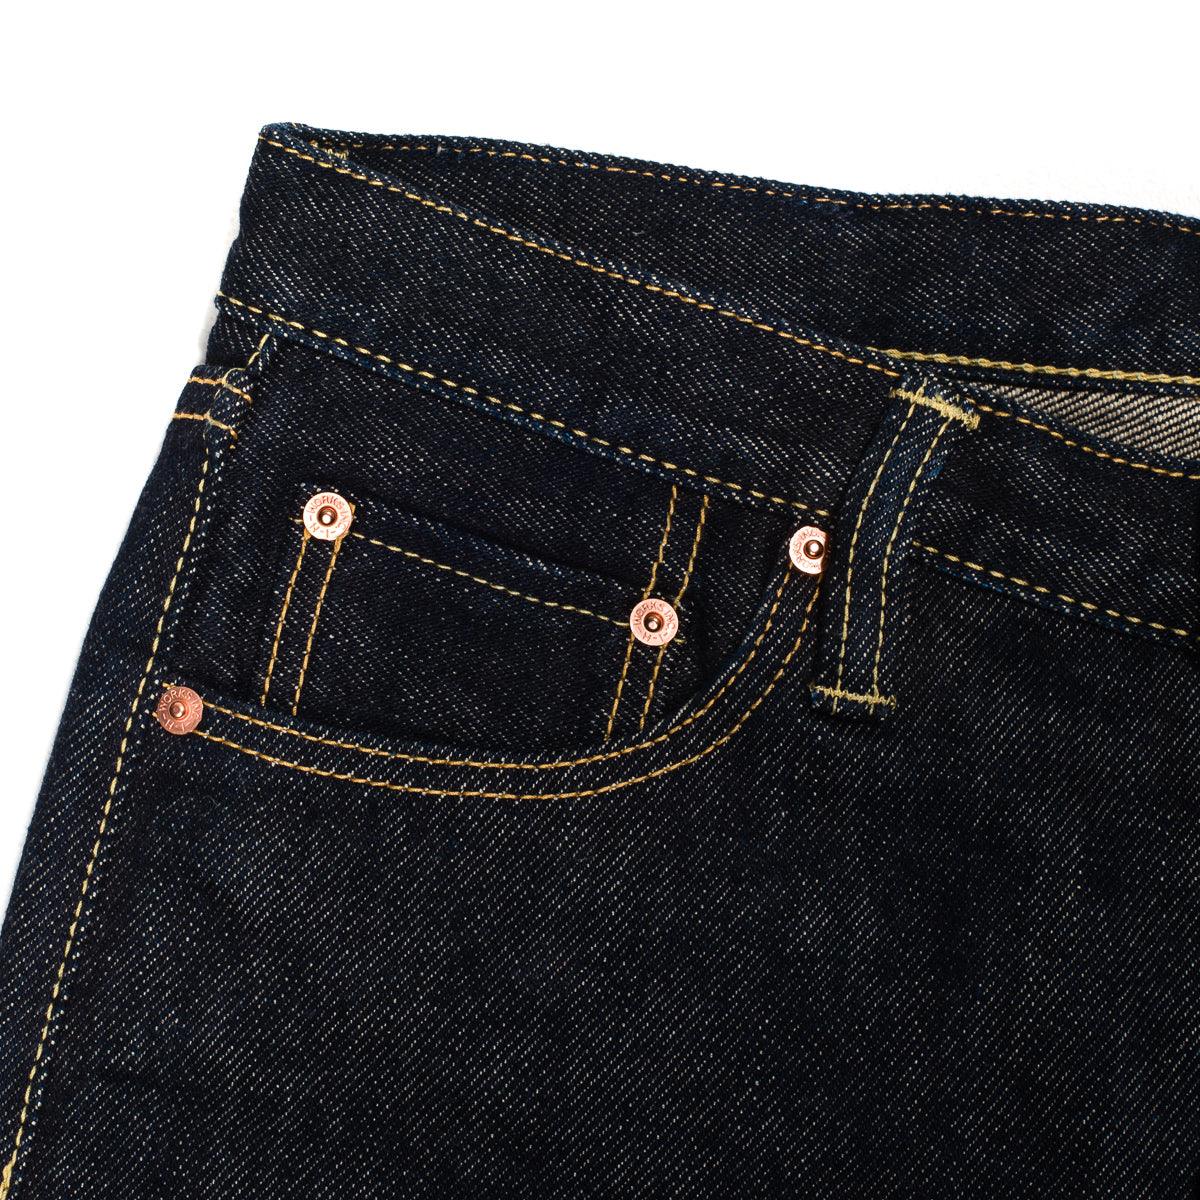 Image showing the IH-777S-21 - 21oz Selvedge Denim Slim Tapered Jeans - Indigo which is a Jeans described by the following info 777, Back In, Bottoms, Iron Heart, Jeans, Released, Tappered and sold on the IRON HEART GERMANY online store